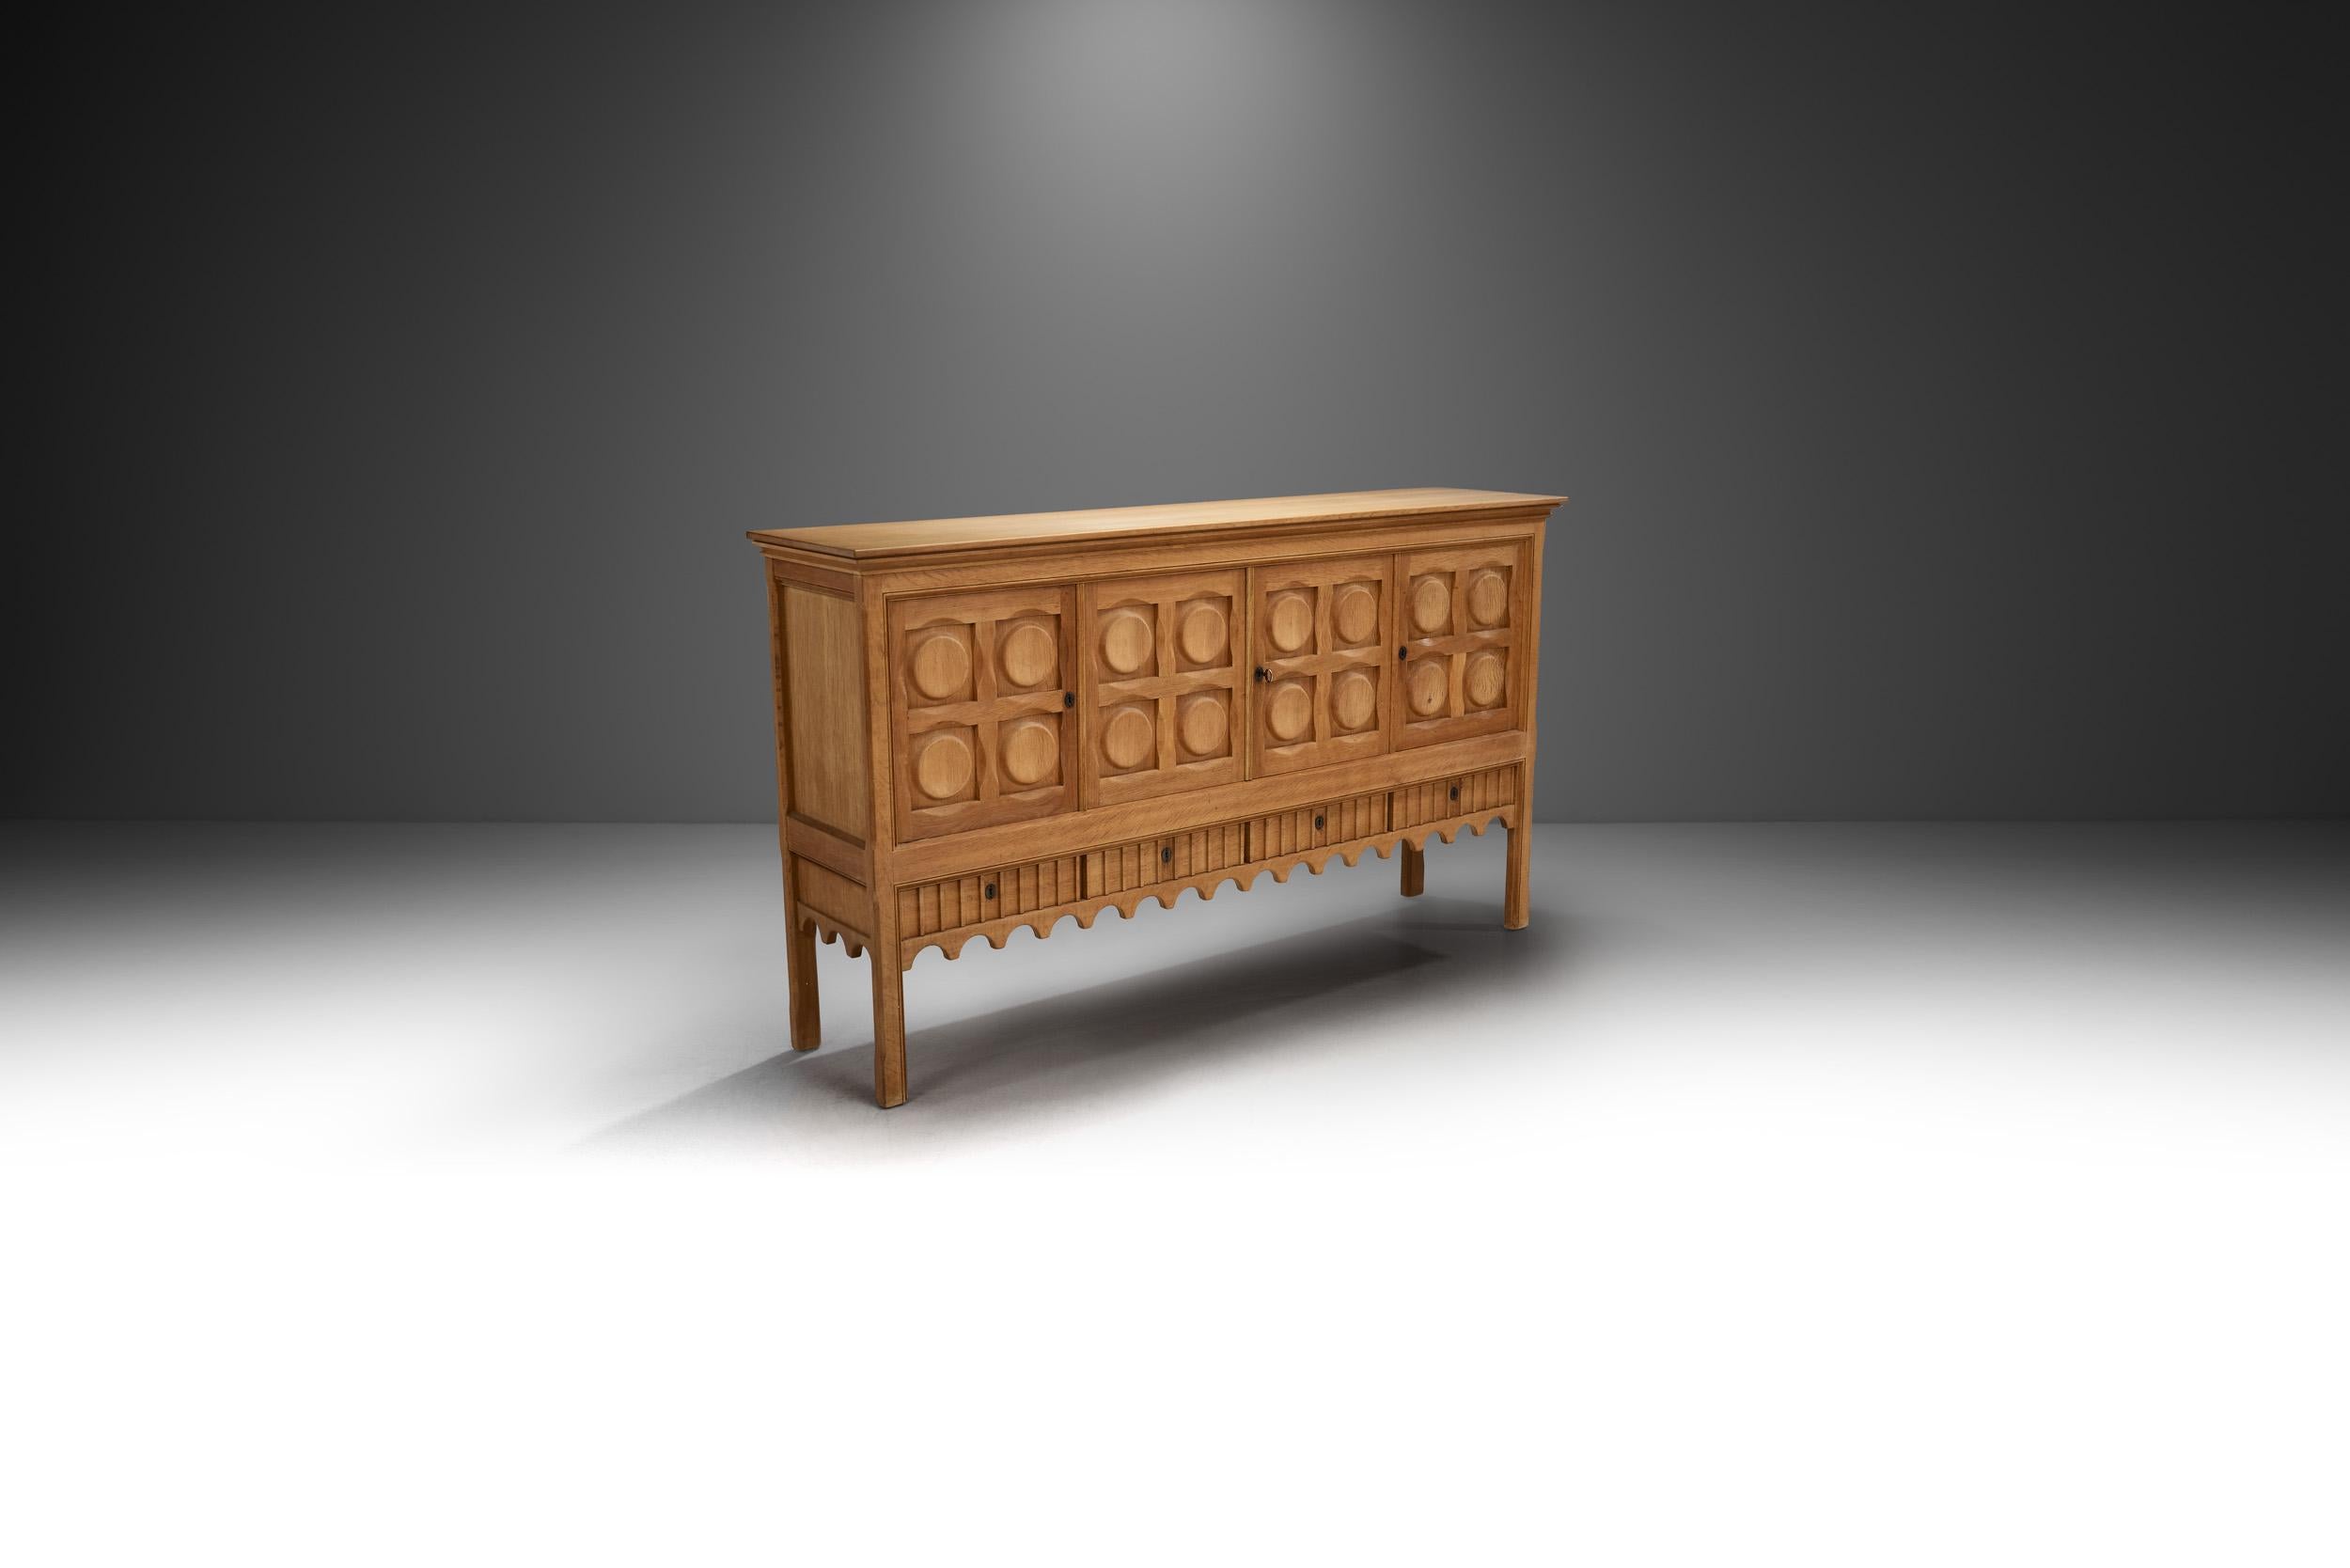 Featuring Danish designer, Henning Kjærnulf’s distinctive scallop motif, this sideboard melds seamlessly with any style thanks to its elegant sense of whimsy. The oak form is elemental, enhanced by the sculptural carvings.

The evolution of